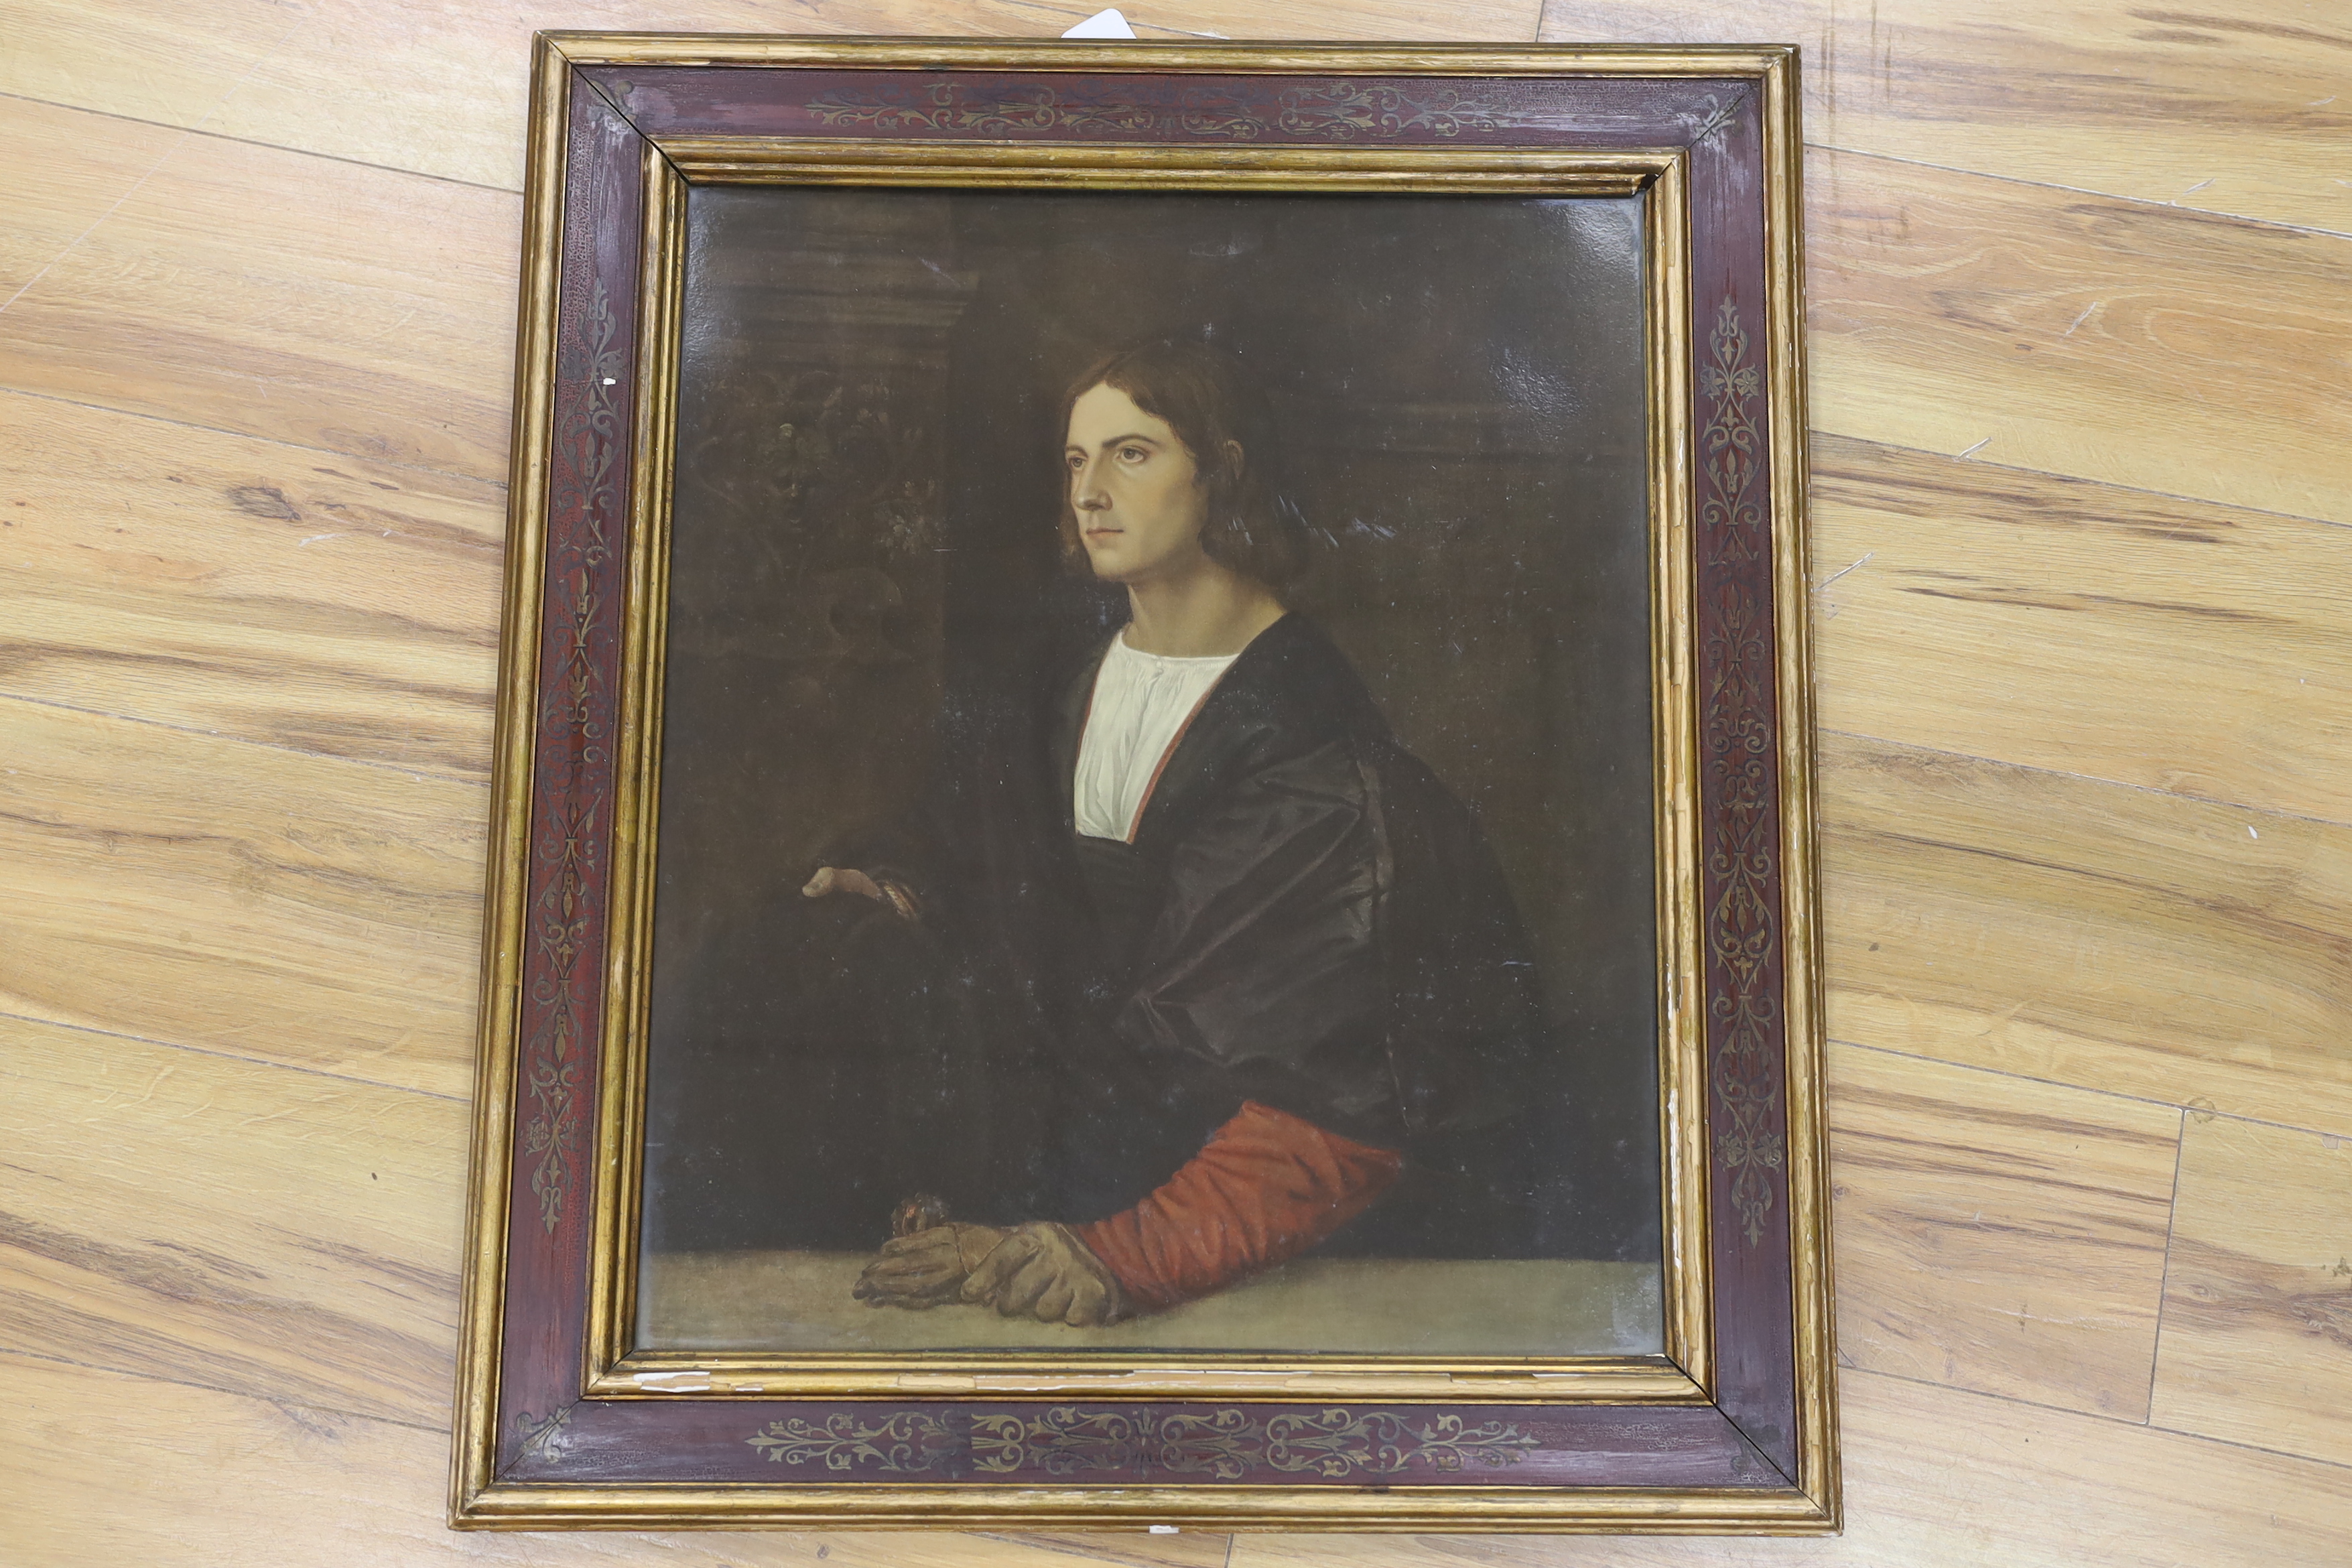 After Titian (Italian, d.1576), Medici Society colour print, Portrait of a young gentleman, label verso, housed in a painted wood frame gilded with fleur de lys, 60 x 50cm